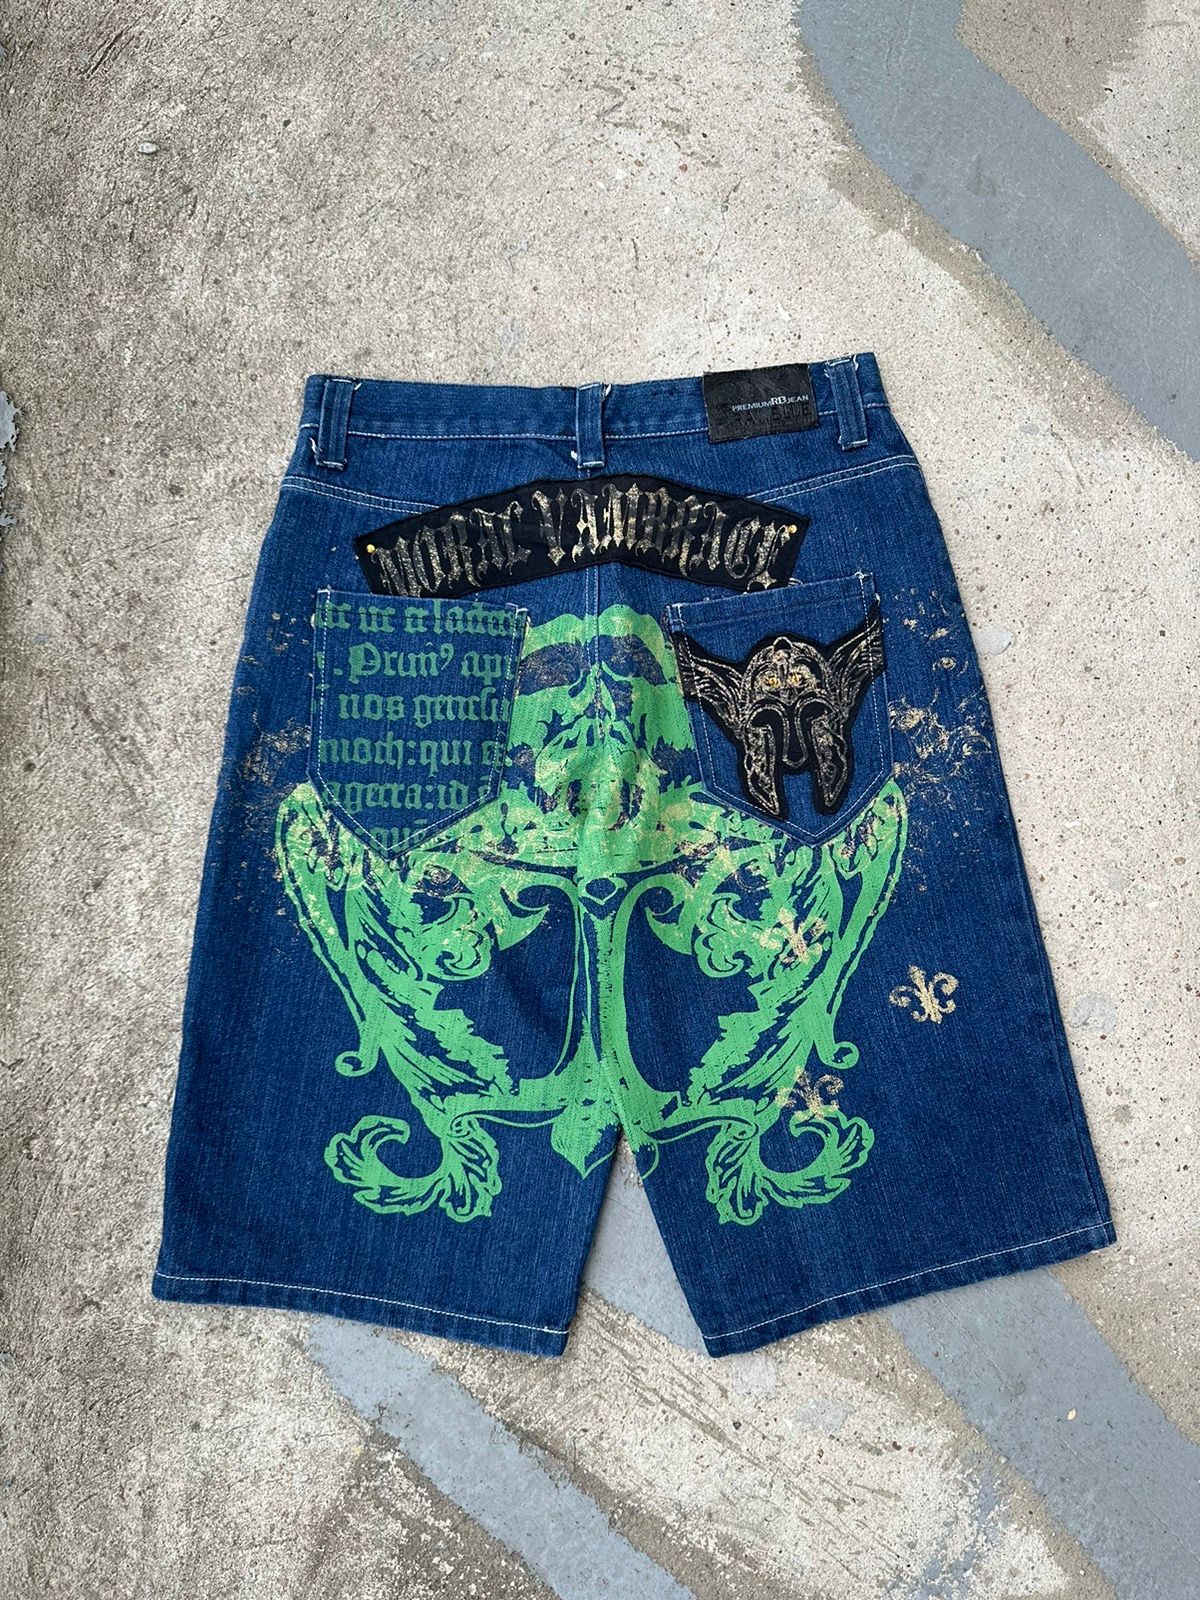 Pre-owned Jnco X Southpole Vintage Baggy Shorts Casual Jeans Jorts Raw Blue Type Jnco